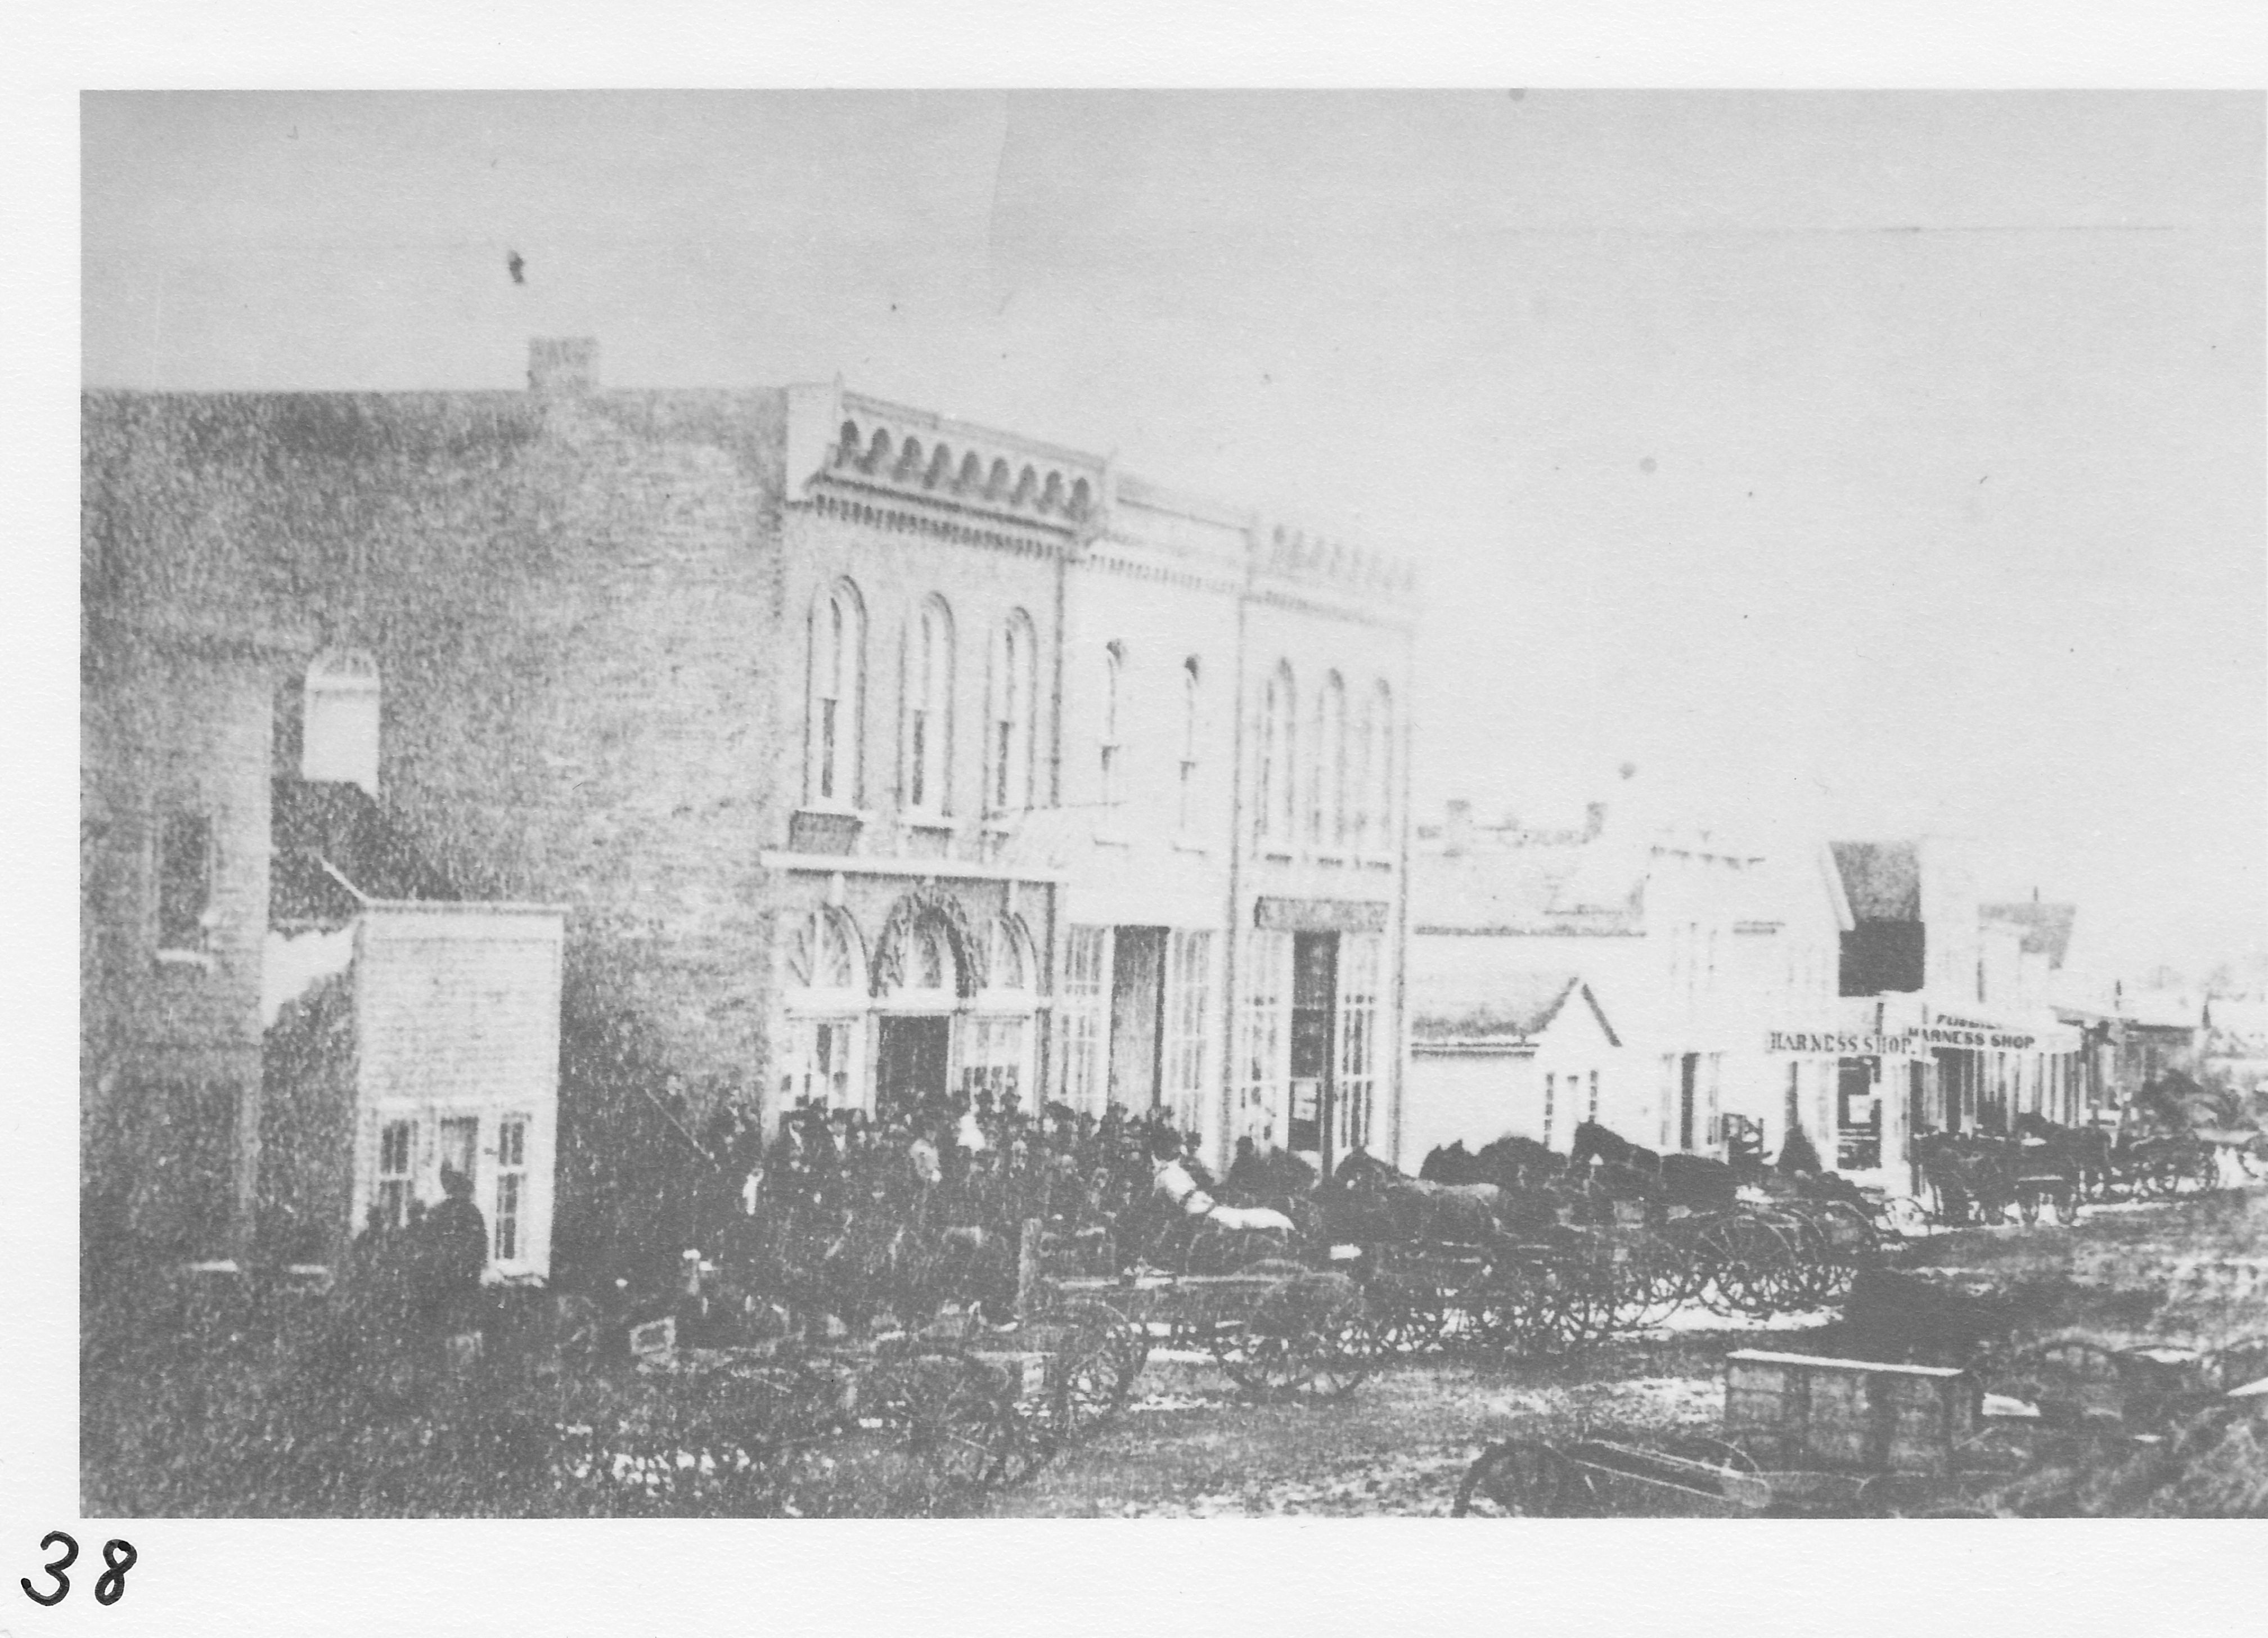 South side of  West  Main Street.  Oldest business district photo known to be in existence.   Civil War period in 1862-1865.  Buildings (l-r).   Shephard’s Bakery.   David Haight’s Drug Store (small bldg.-1853; still in use. George Smith Residence N. Summit).  J. P. Cawley Merchandise.   Hagamon & Garlick (Morenci Drug – built in 1862).   J. P. Richard’s Dry Goods (built in 1862- former Decker Hardware).